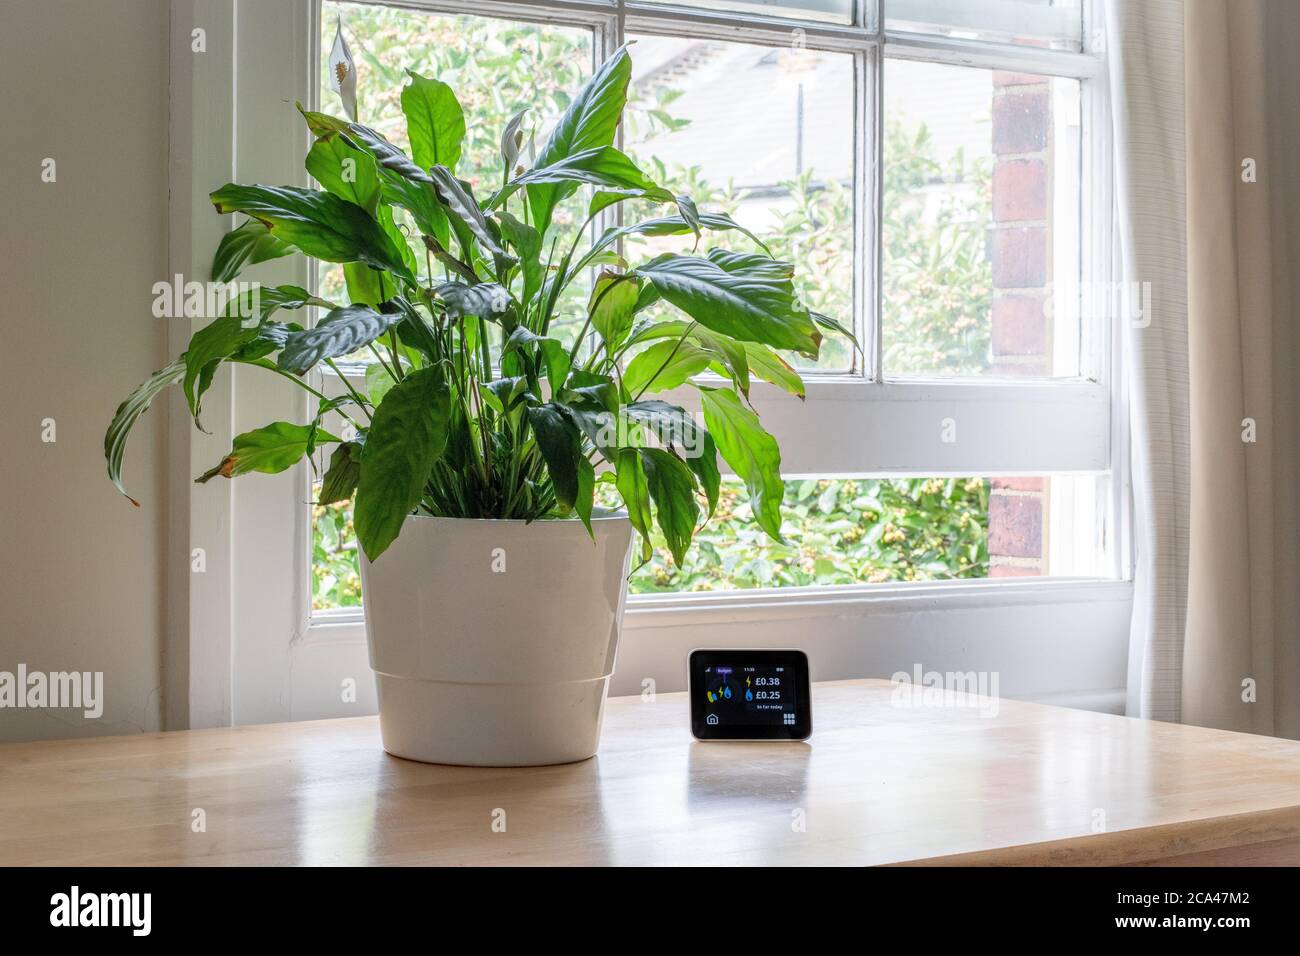 London / UK - August 04 2020: Energy efficiency home control system and monitor next to a plant in a beautifully designed home. Stock Photo